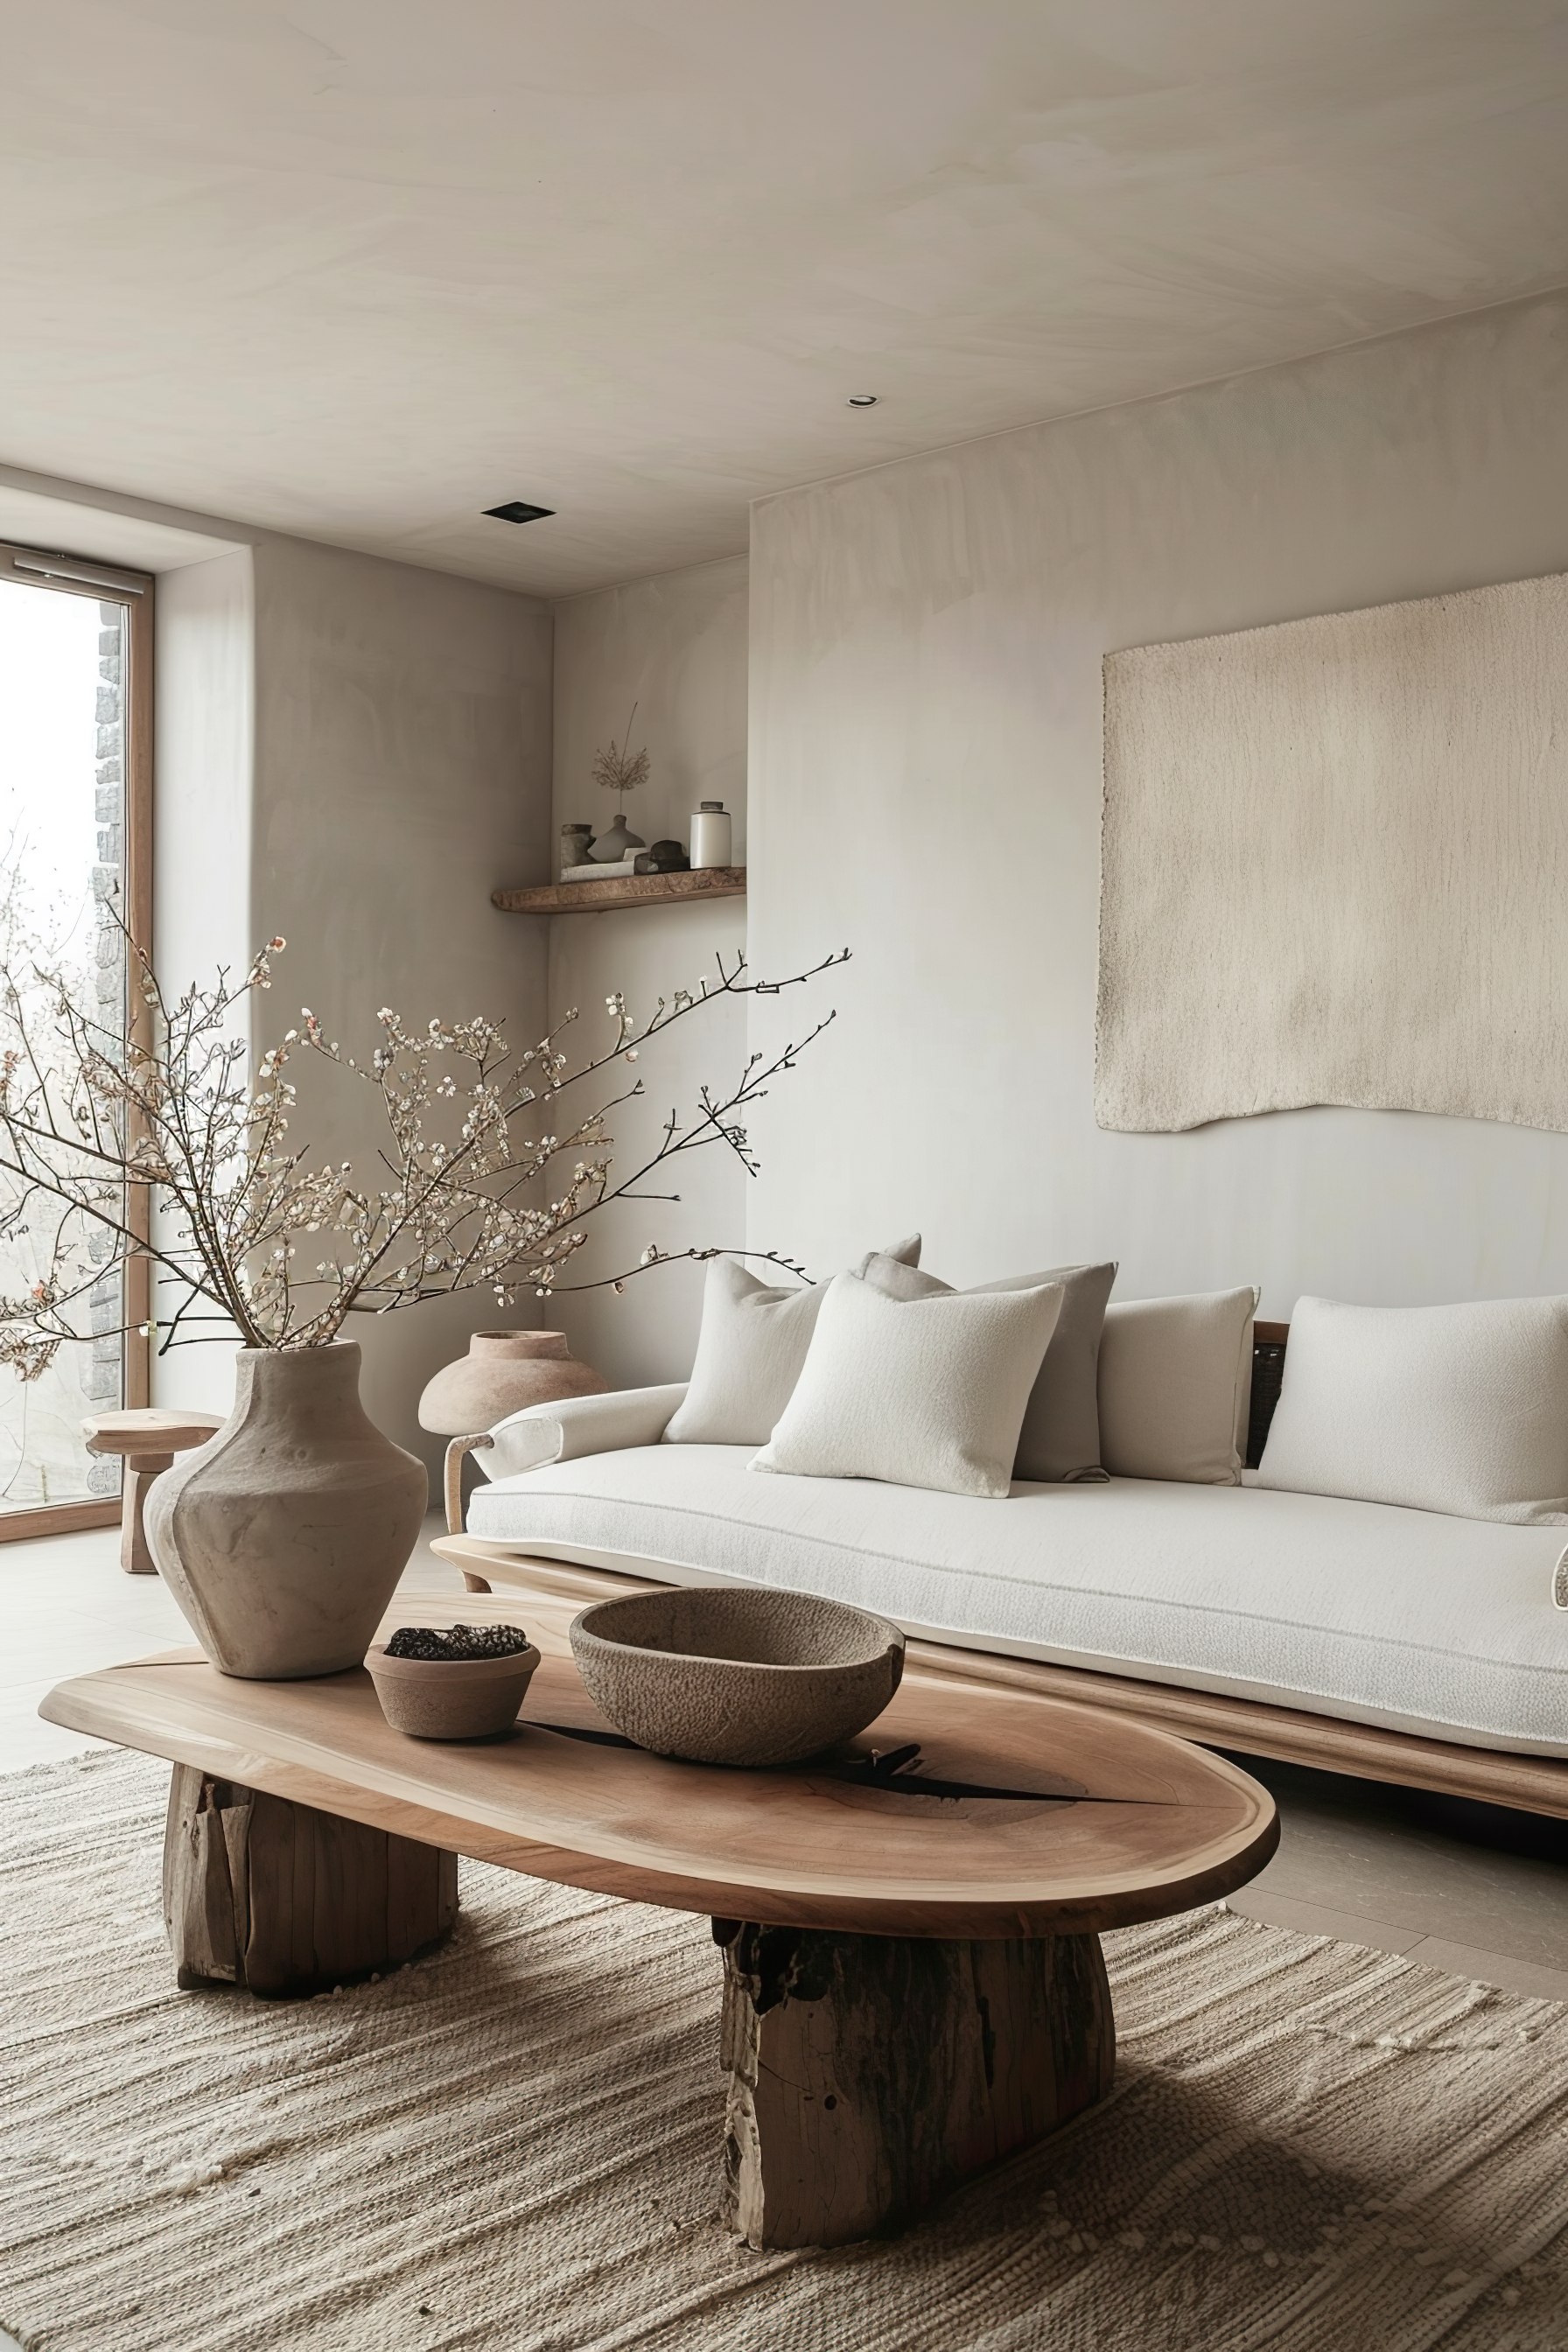 A minimalist living room with a neutral color palette, featuring a sofa with pillows, a rustic wooden coffee table, and a large vase with branches.